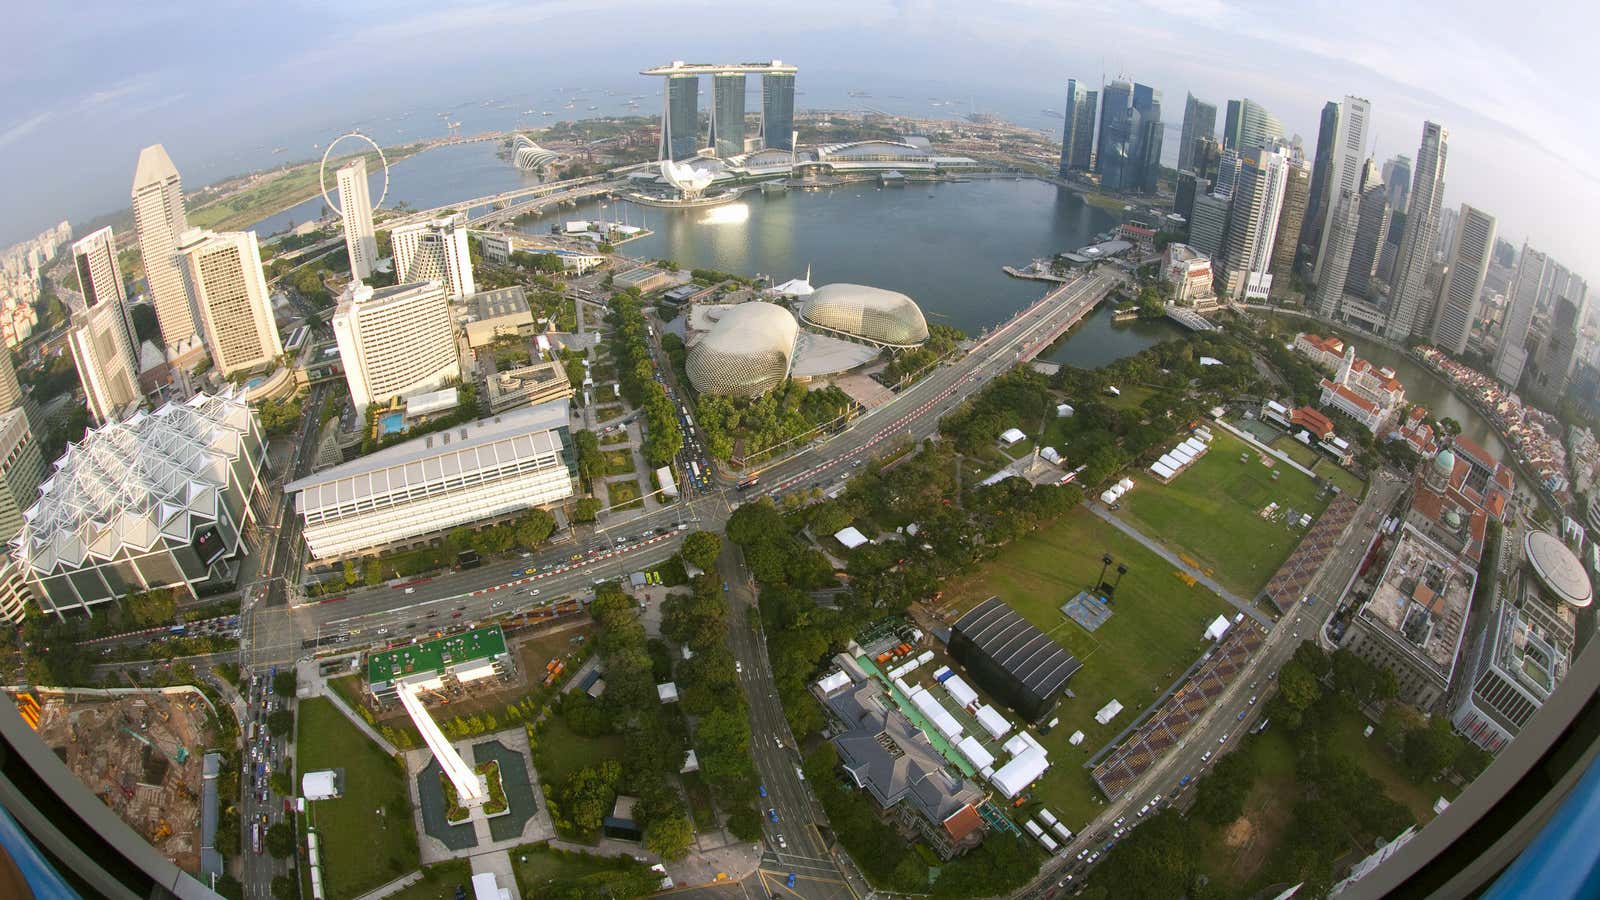 From Marina Bay to the central business district.